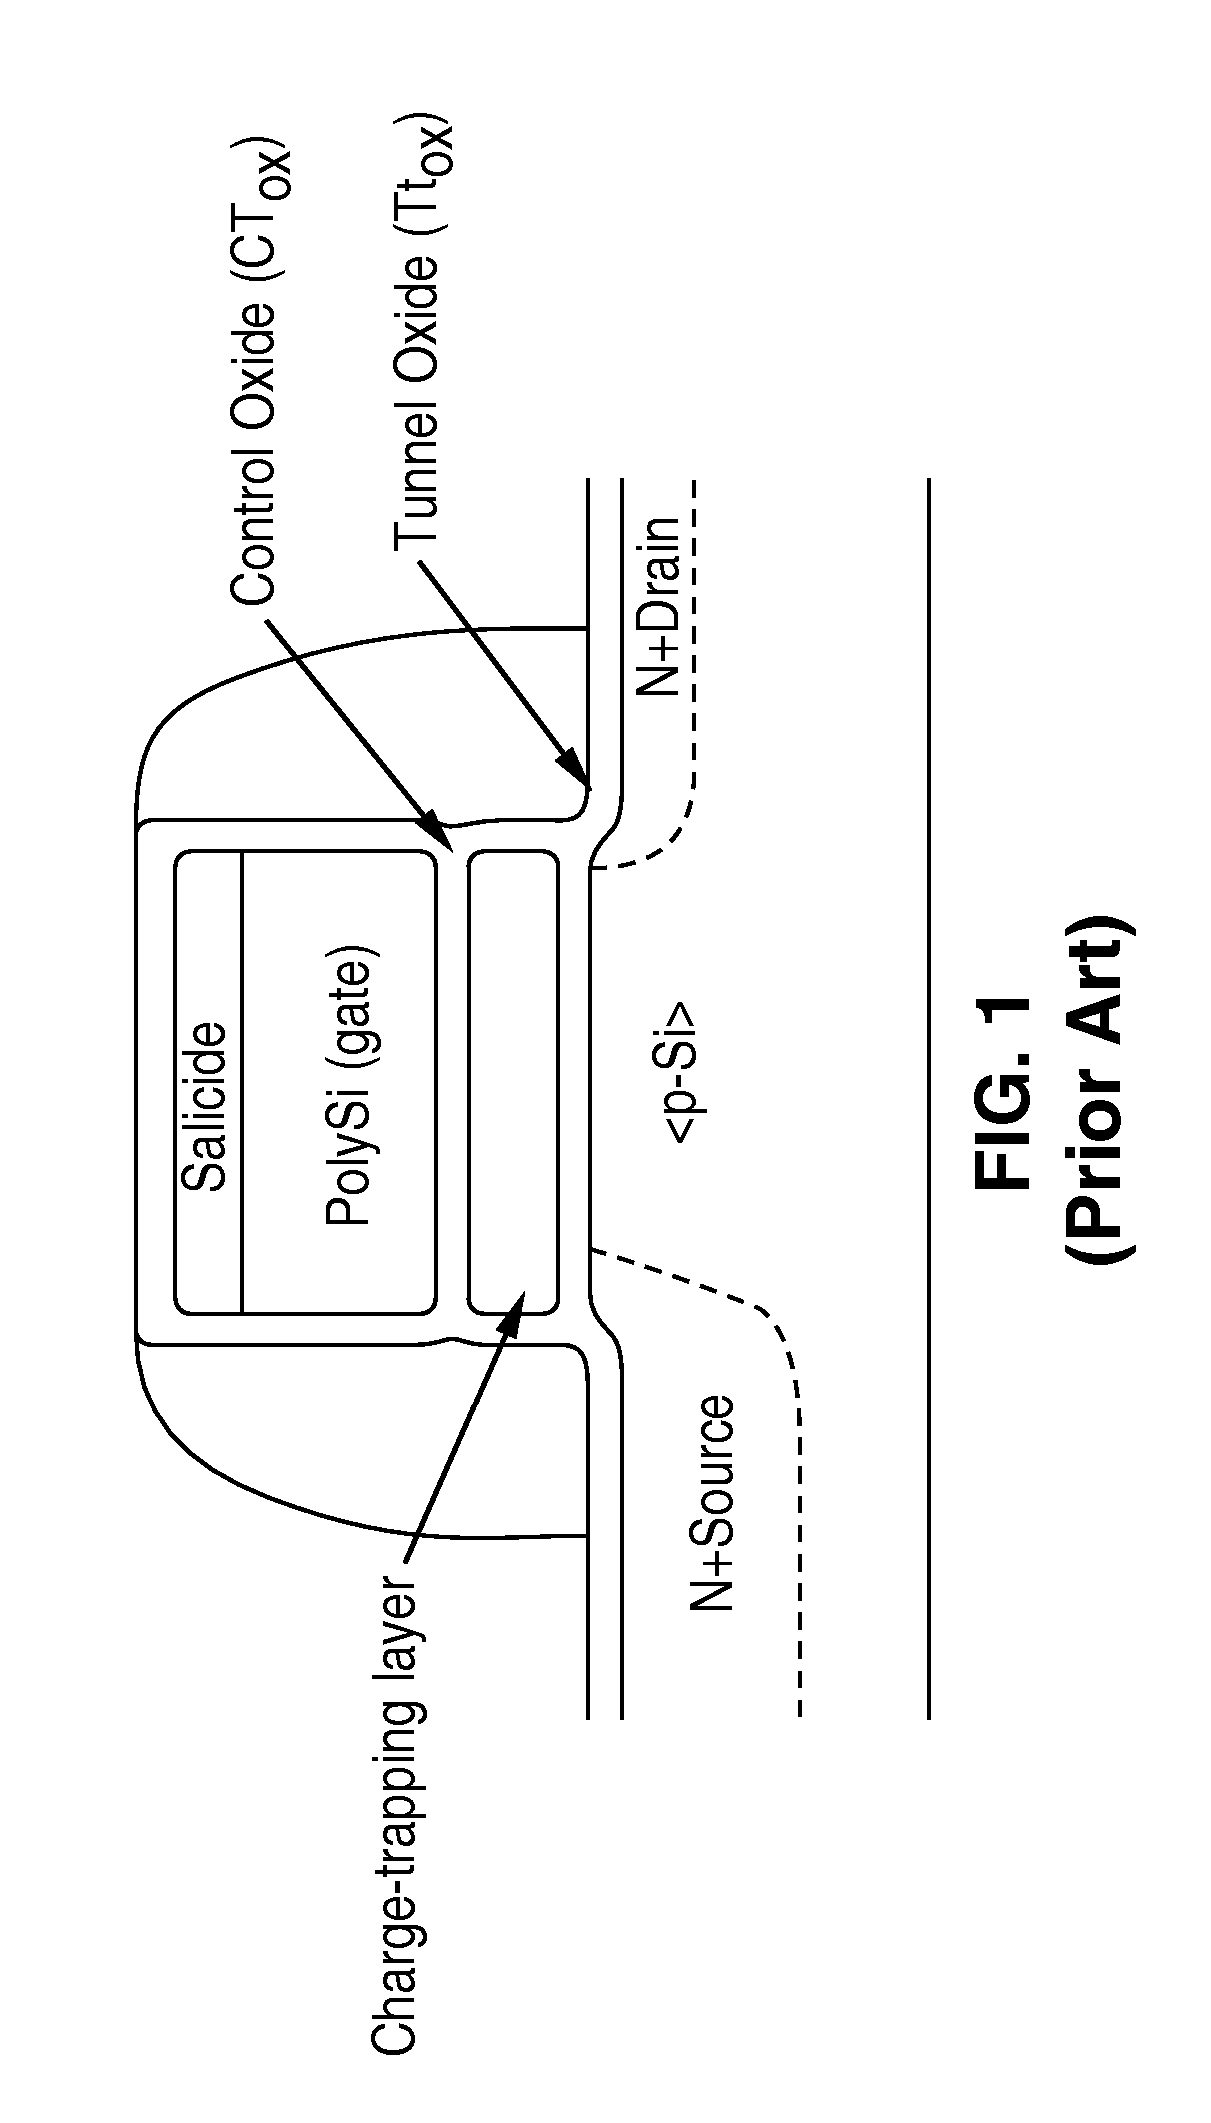 Multi-bit-per-cell nvm structures and architecture